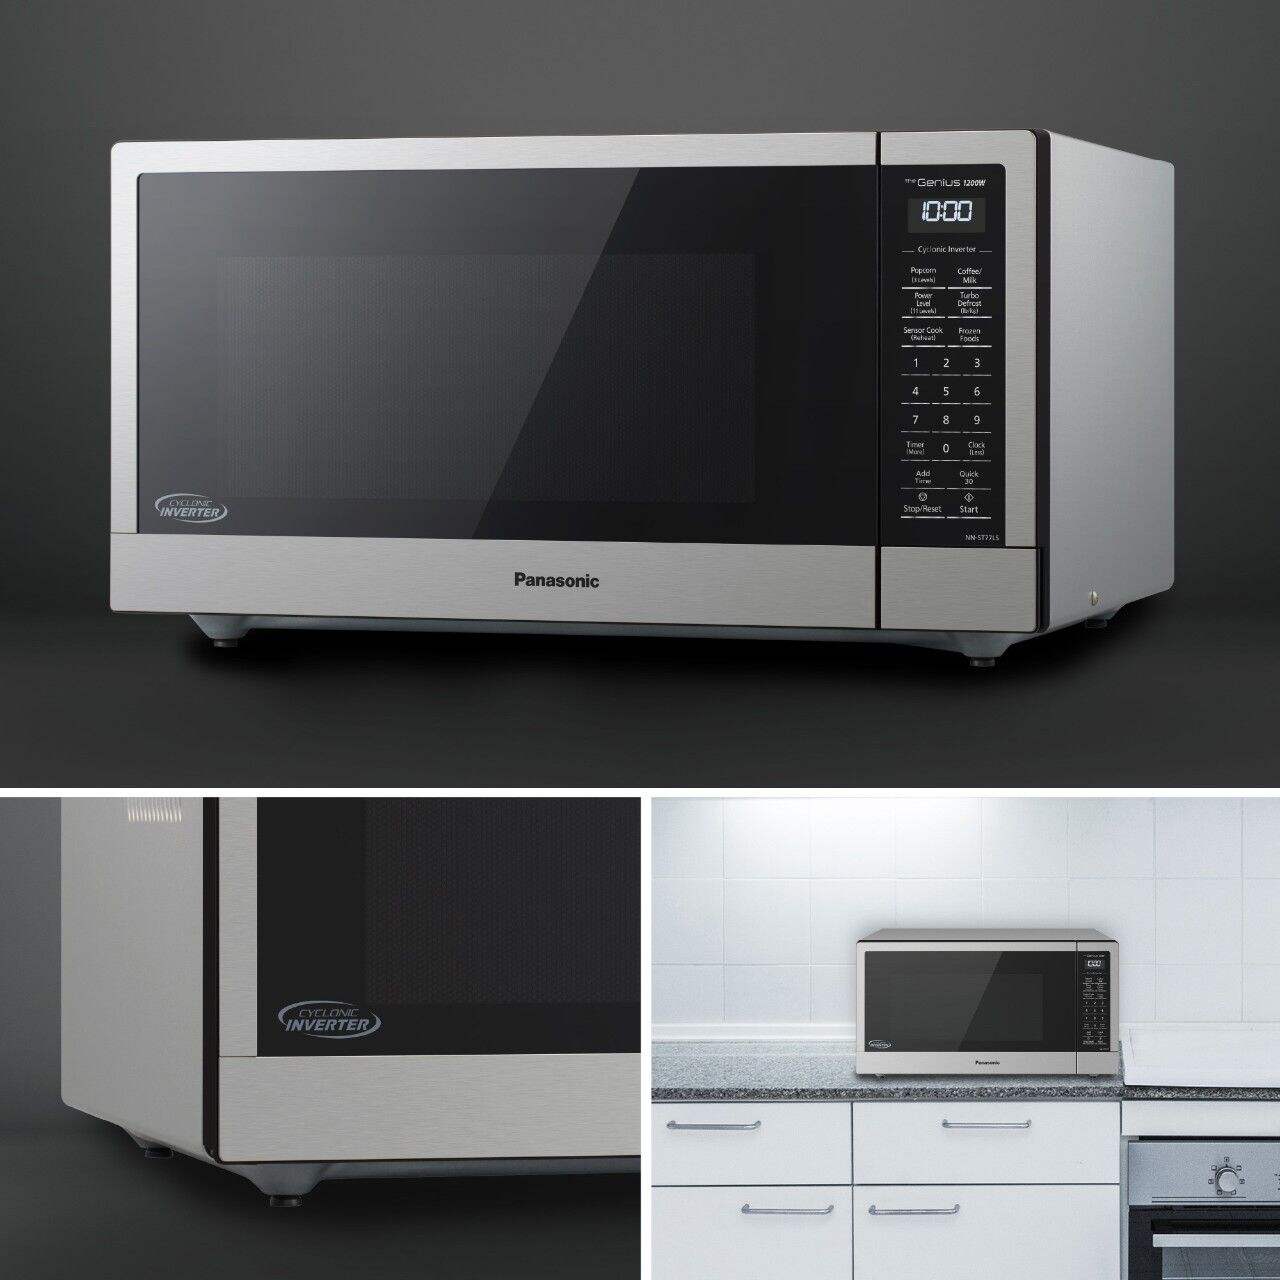 Panasonic Microwave Oven, Stainless Steel, 1.6-cu-ft